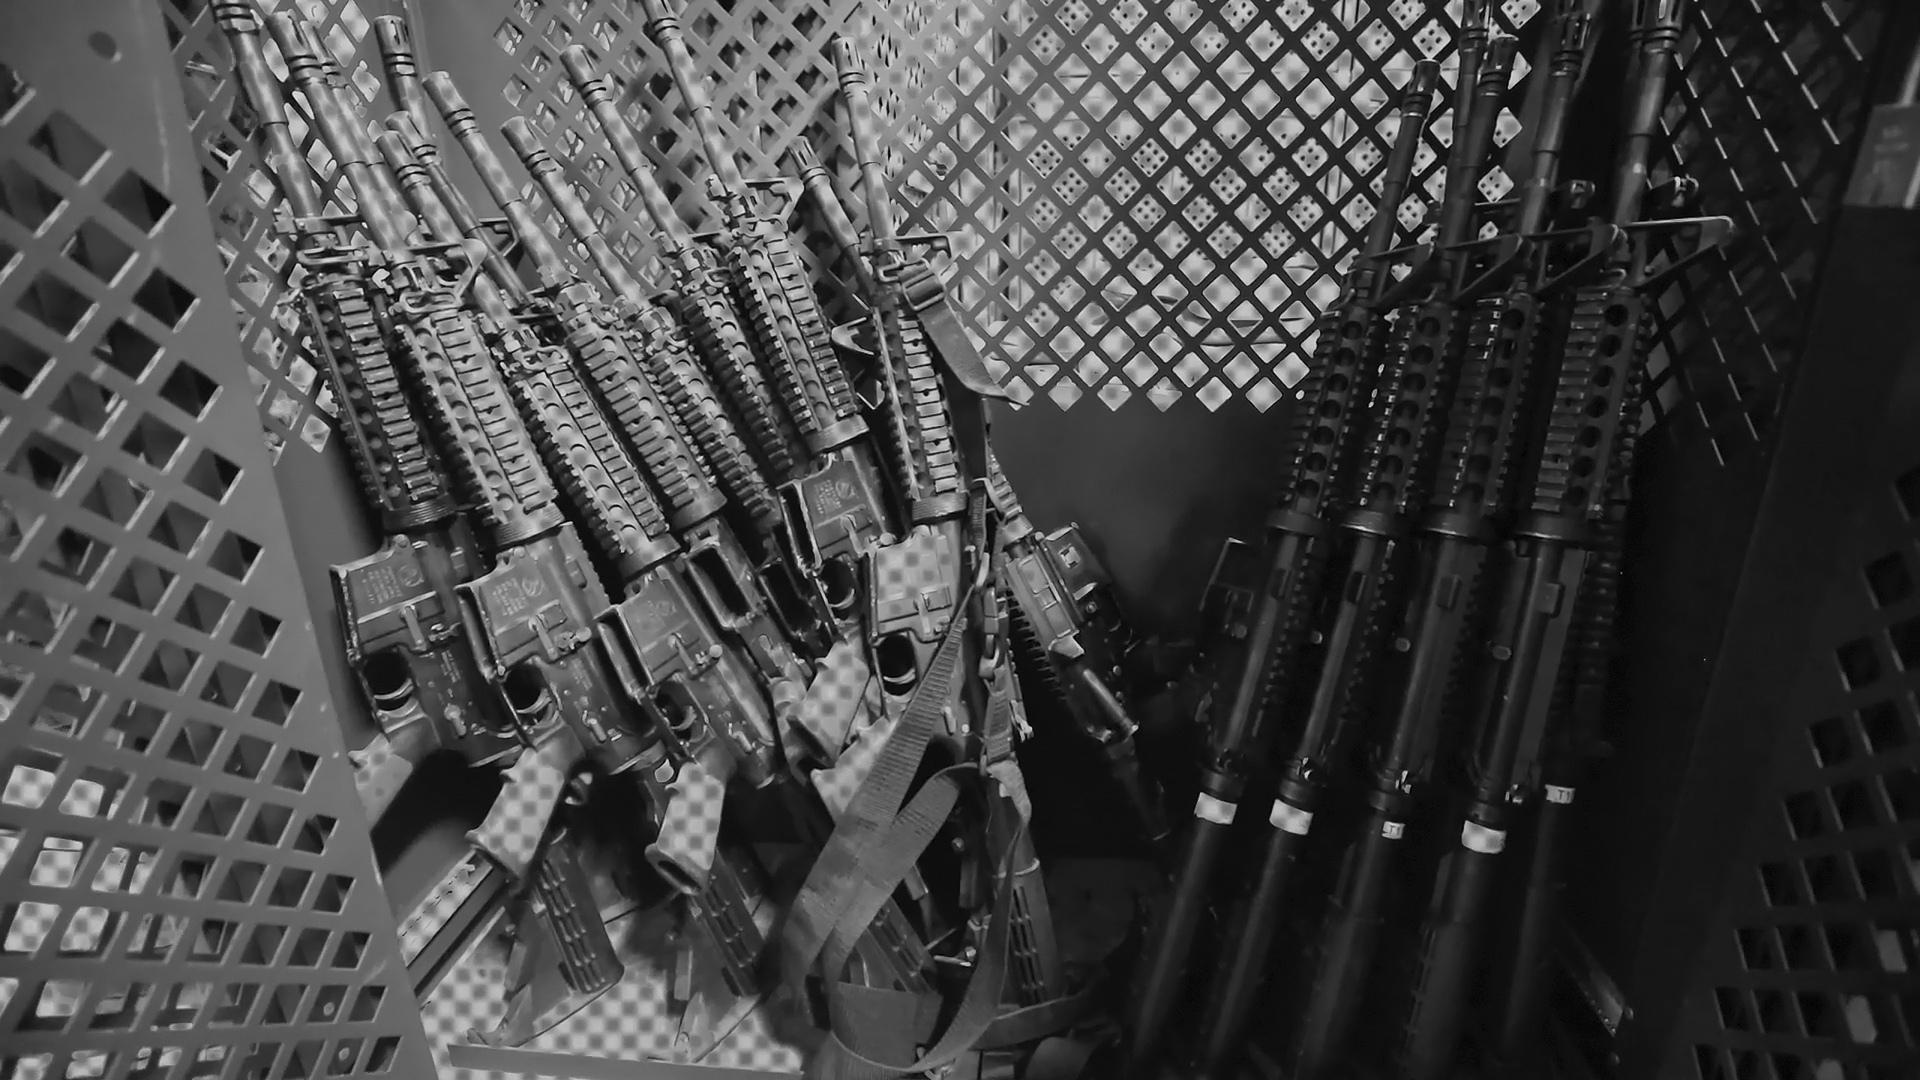 Some stolen US military guns used in violent crimes